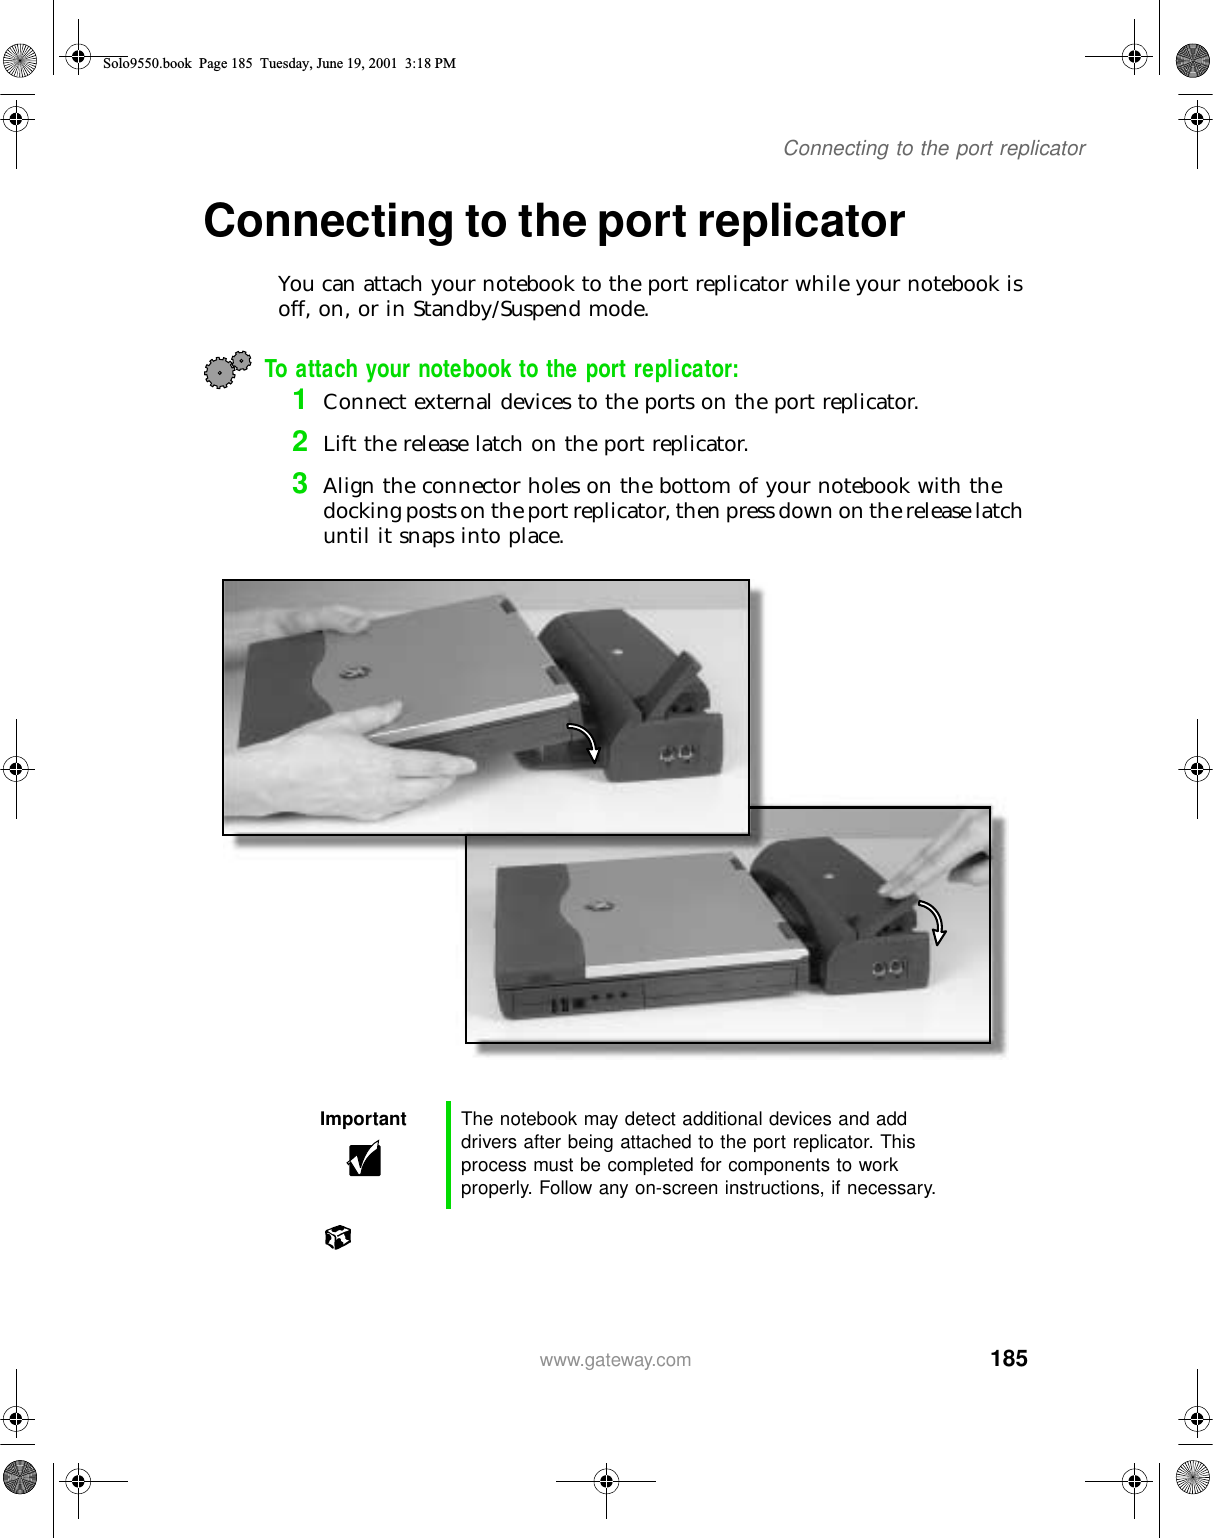 185Connecting to the port replicatorwww.gateway.comConnecting to the port replicatorYou can attach your notebook to the port replicator while your notebook is off, on, or in Standby/Suspend mode.To attach your notebook to the port replicator:1Connect external devices to the ports on the port replicator.2Lift the release latch on the port replicator.3Align the connector holes on the bottom of your notebook with the docking posts on the port replicator, then press down on the release latch until it snaps into place.Important The notebook may detect additional devices and add drivers after being attached to the port replicator. This process must be completed for components to work properly. Follow any on-screen instructions, if necessary.Solo9550.book Page 185 Tuesday, June 19, 2001 3:18 PM